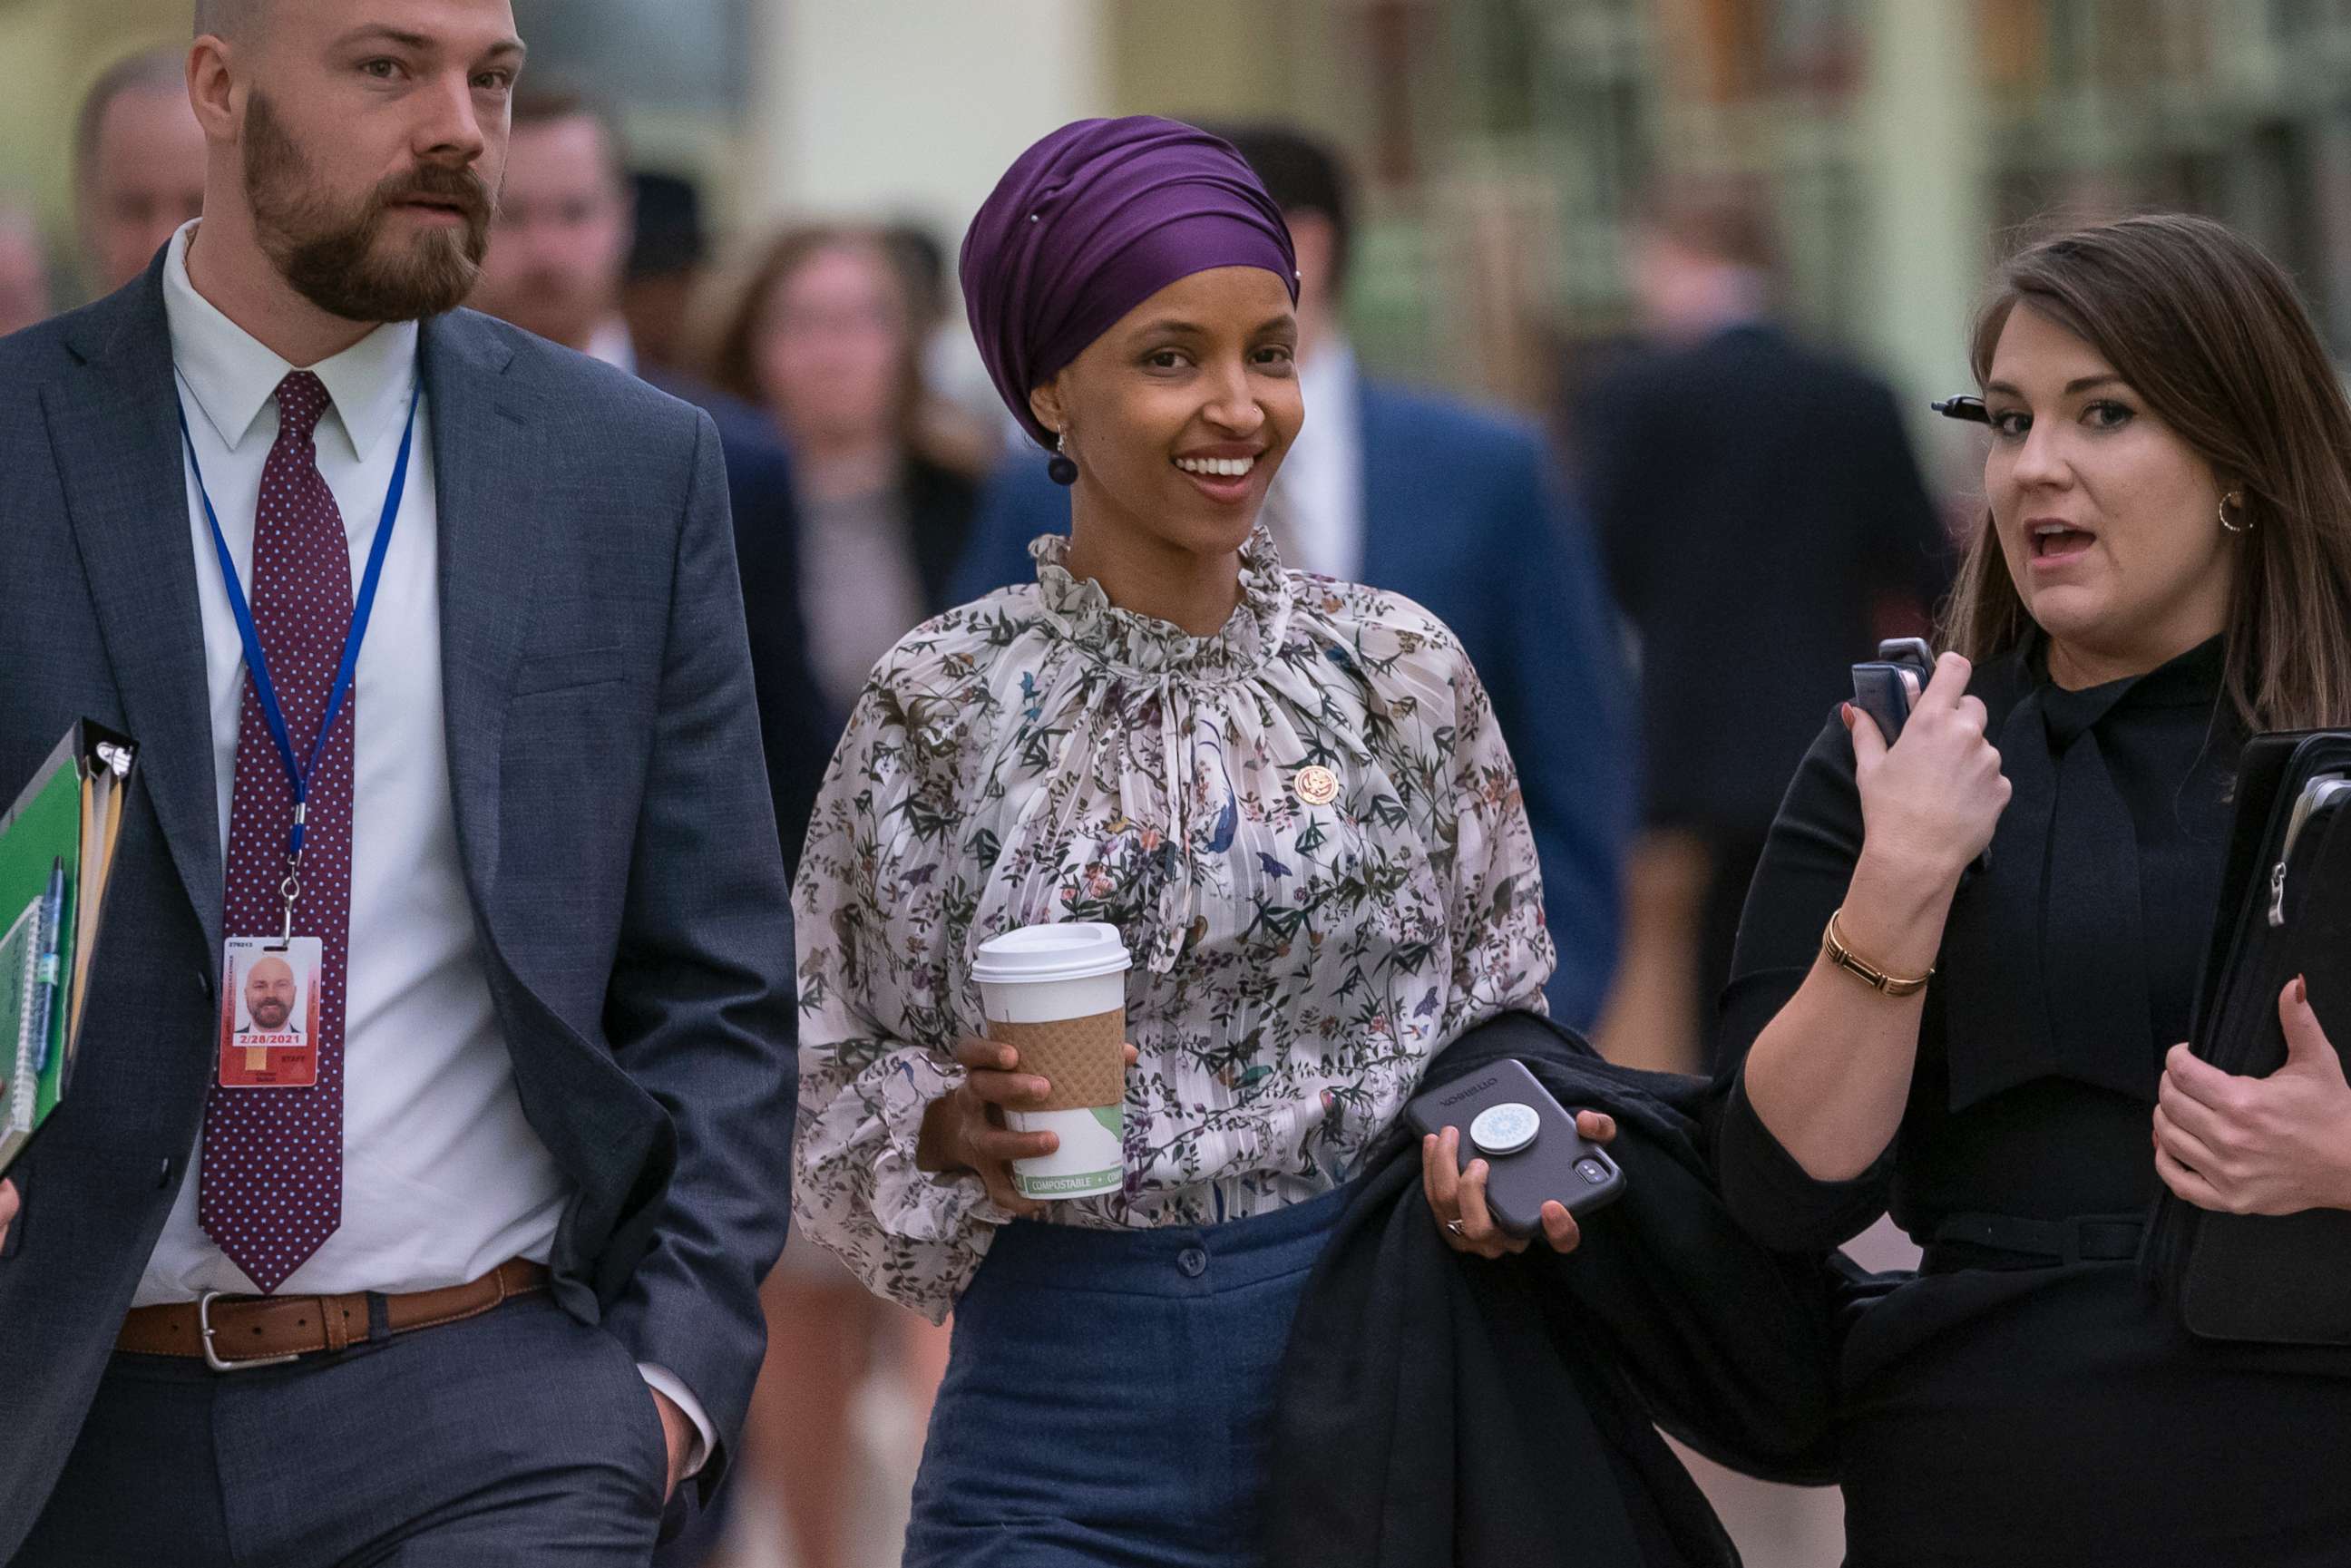 PHOTO: Rep. Ilhan Omar walks through an underground tunnel at the Capitol as top House Democrats plan to offer a measure that condemns anti-Semitism in the wake of controversial remarks by the freshman congresswoman, in Washington, D.C., March 6, 2019.